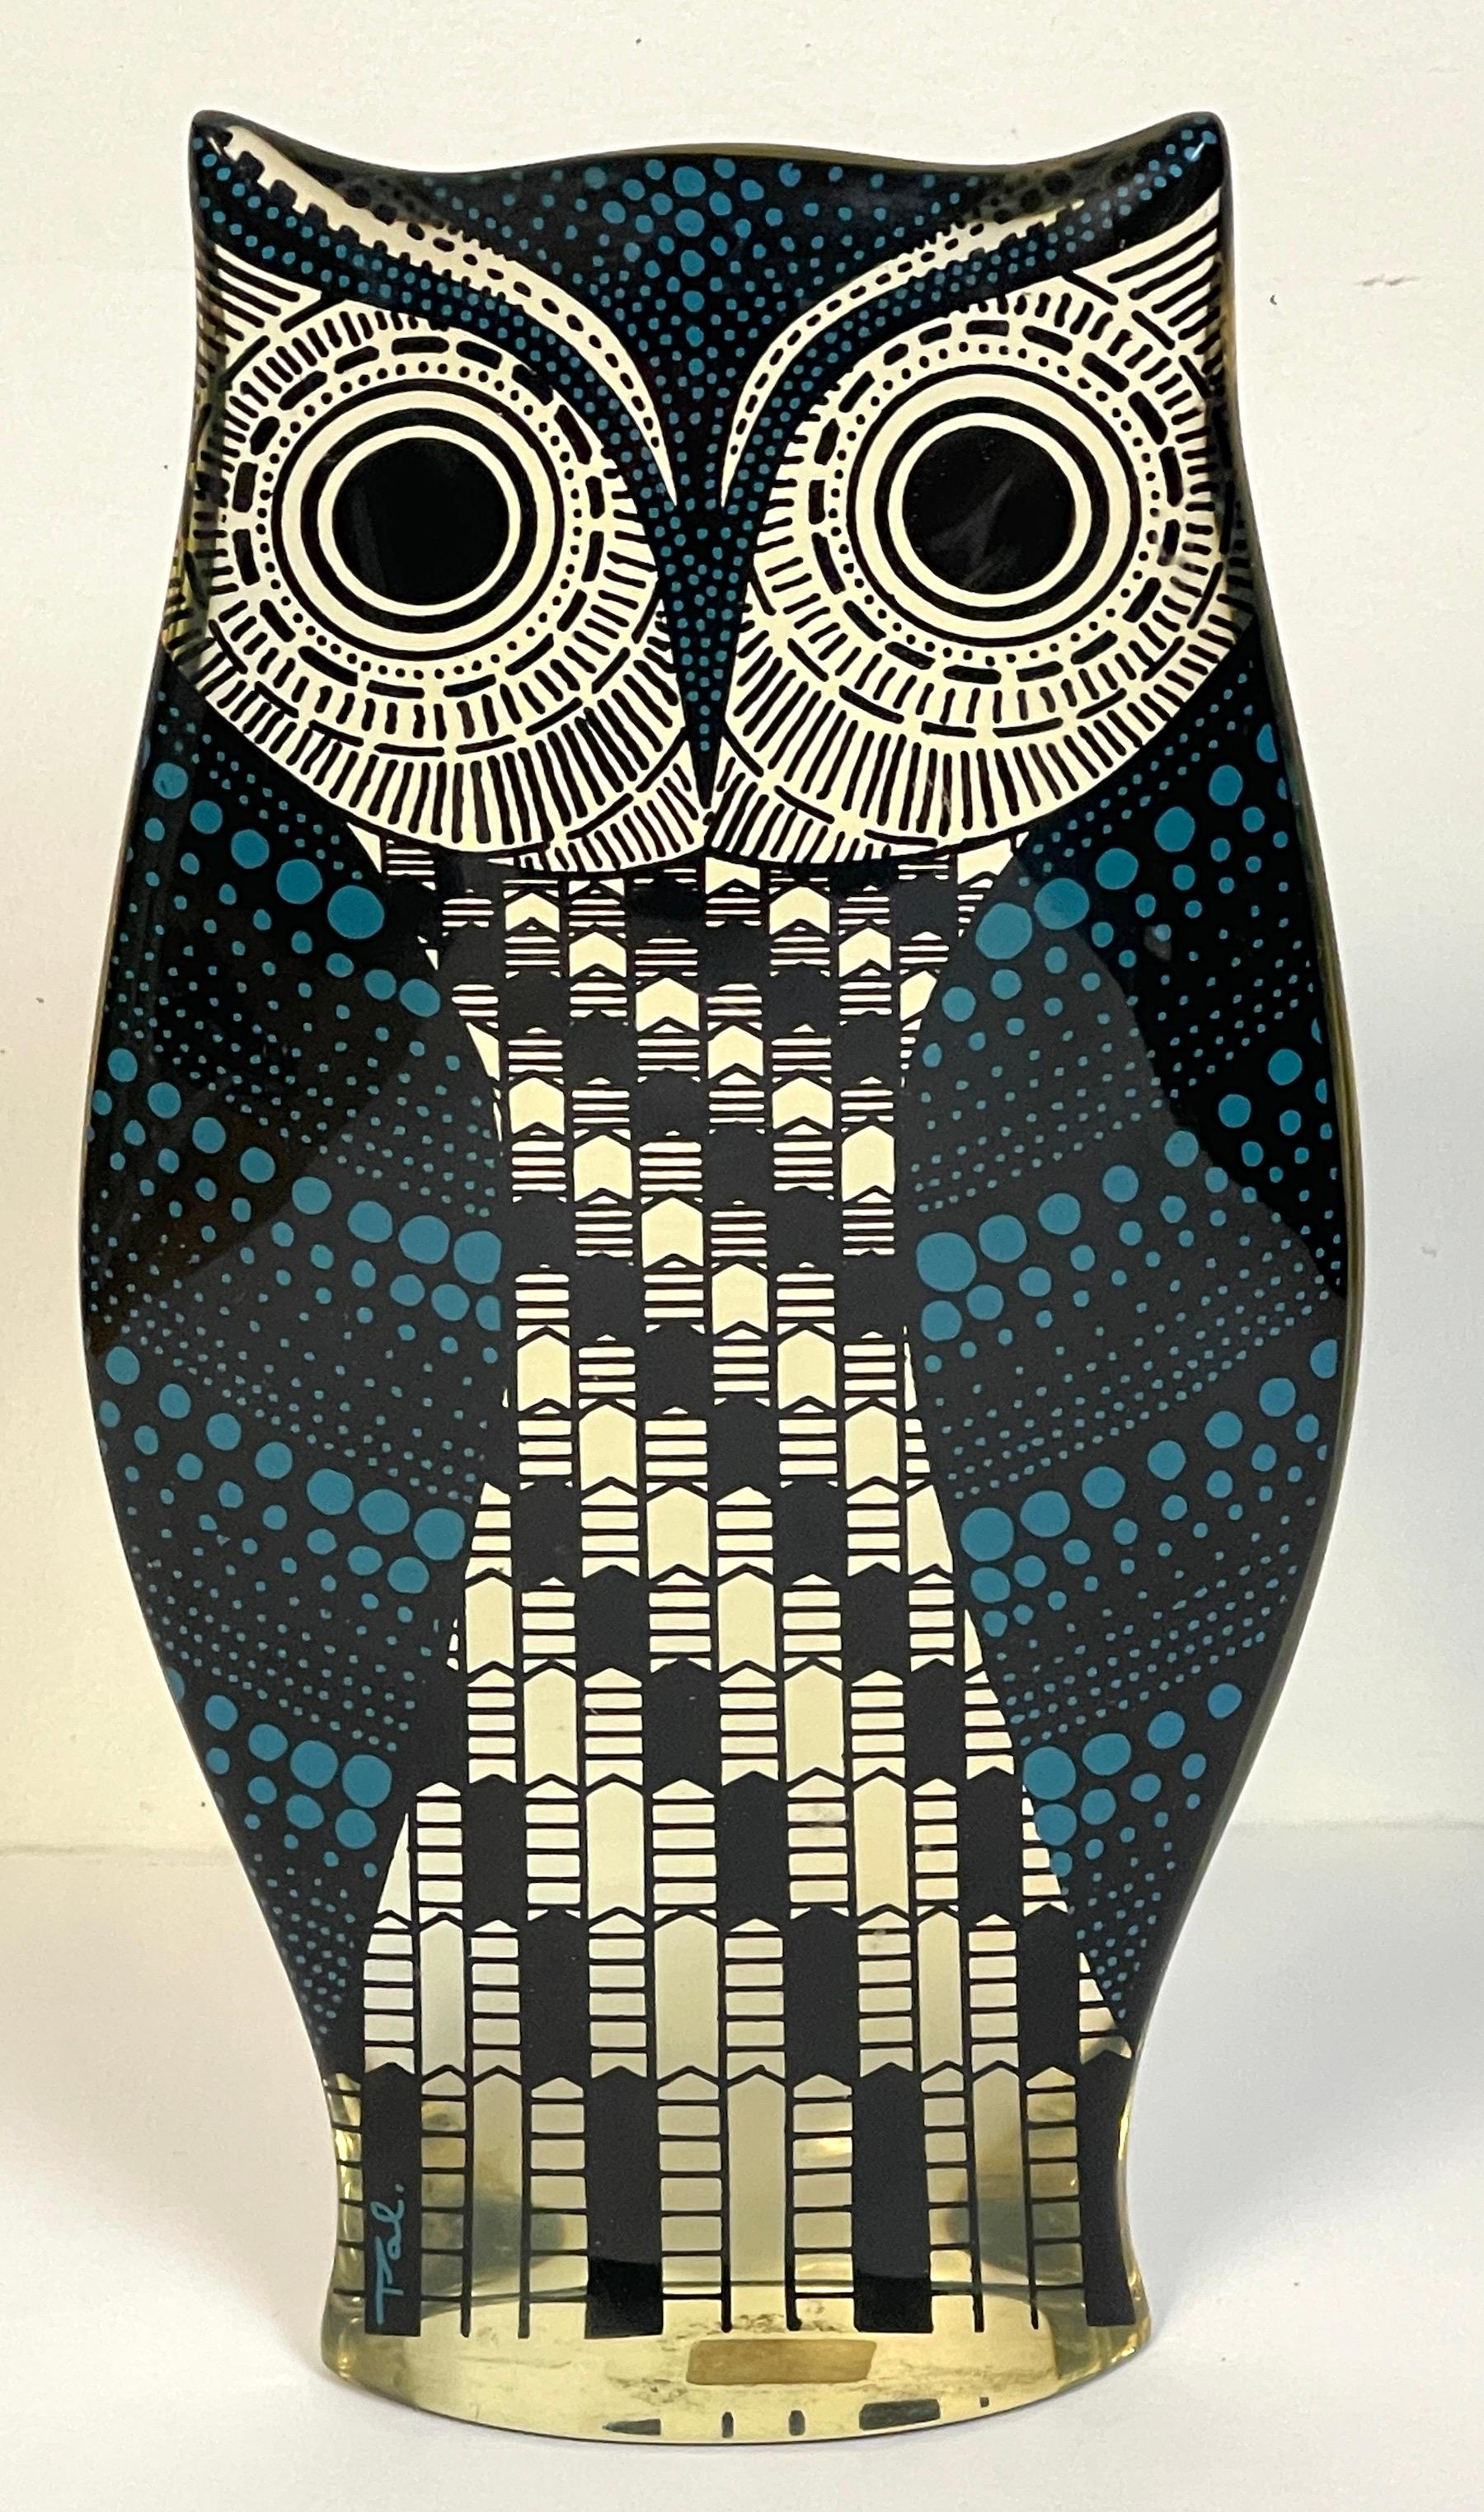 Kinechromatic Lucite Owl by Abraham Palatnik, C 1970s
A colorful lucite op art standing figure of an owl, by Brazilian artist Abraham Palatnik (1928-2020) T
he owl figure stands 7-Inches high x 4-Inches wide x 2- Inches deep
Remnants of a 